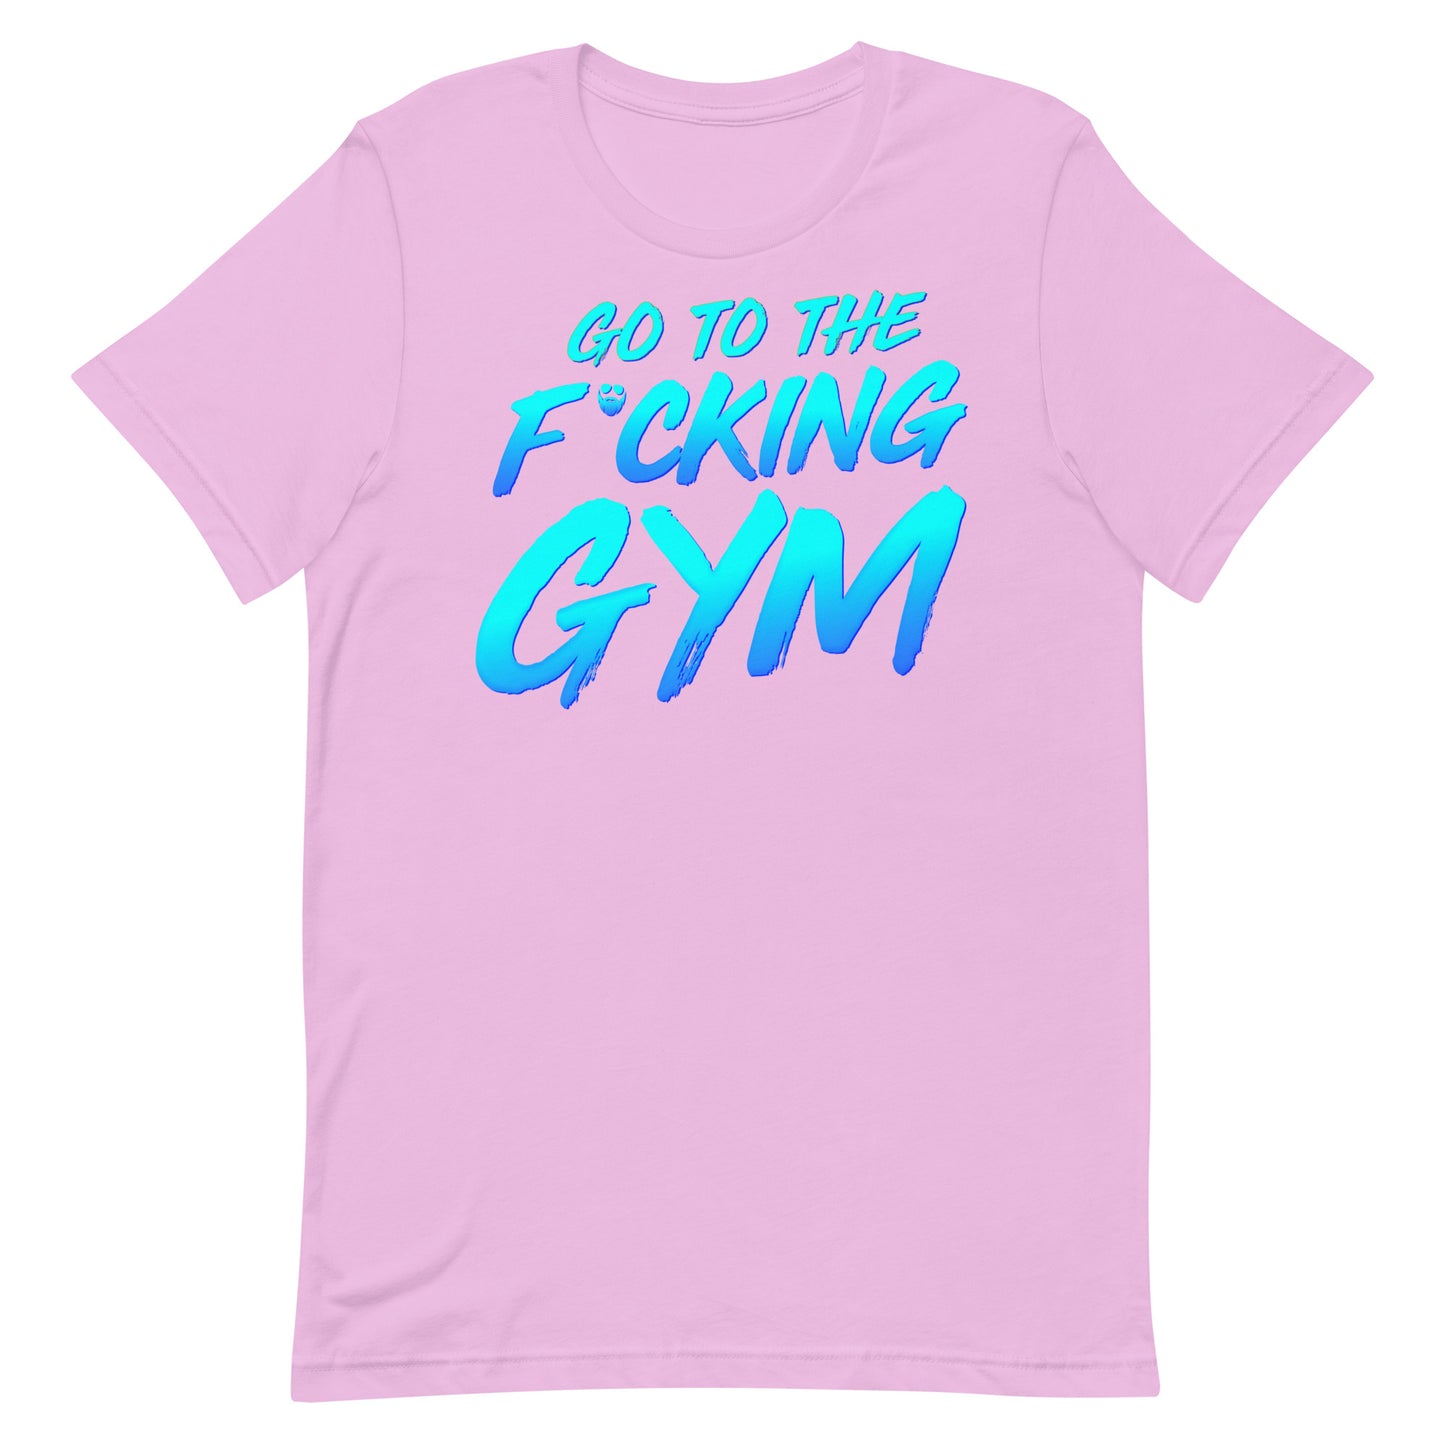 Go To The F*cking Gym T-Shirt